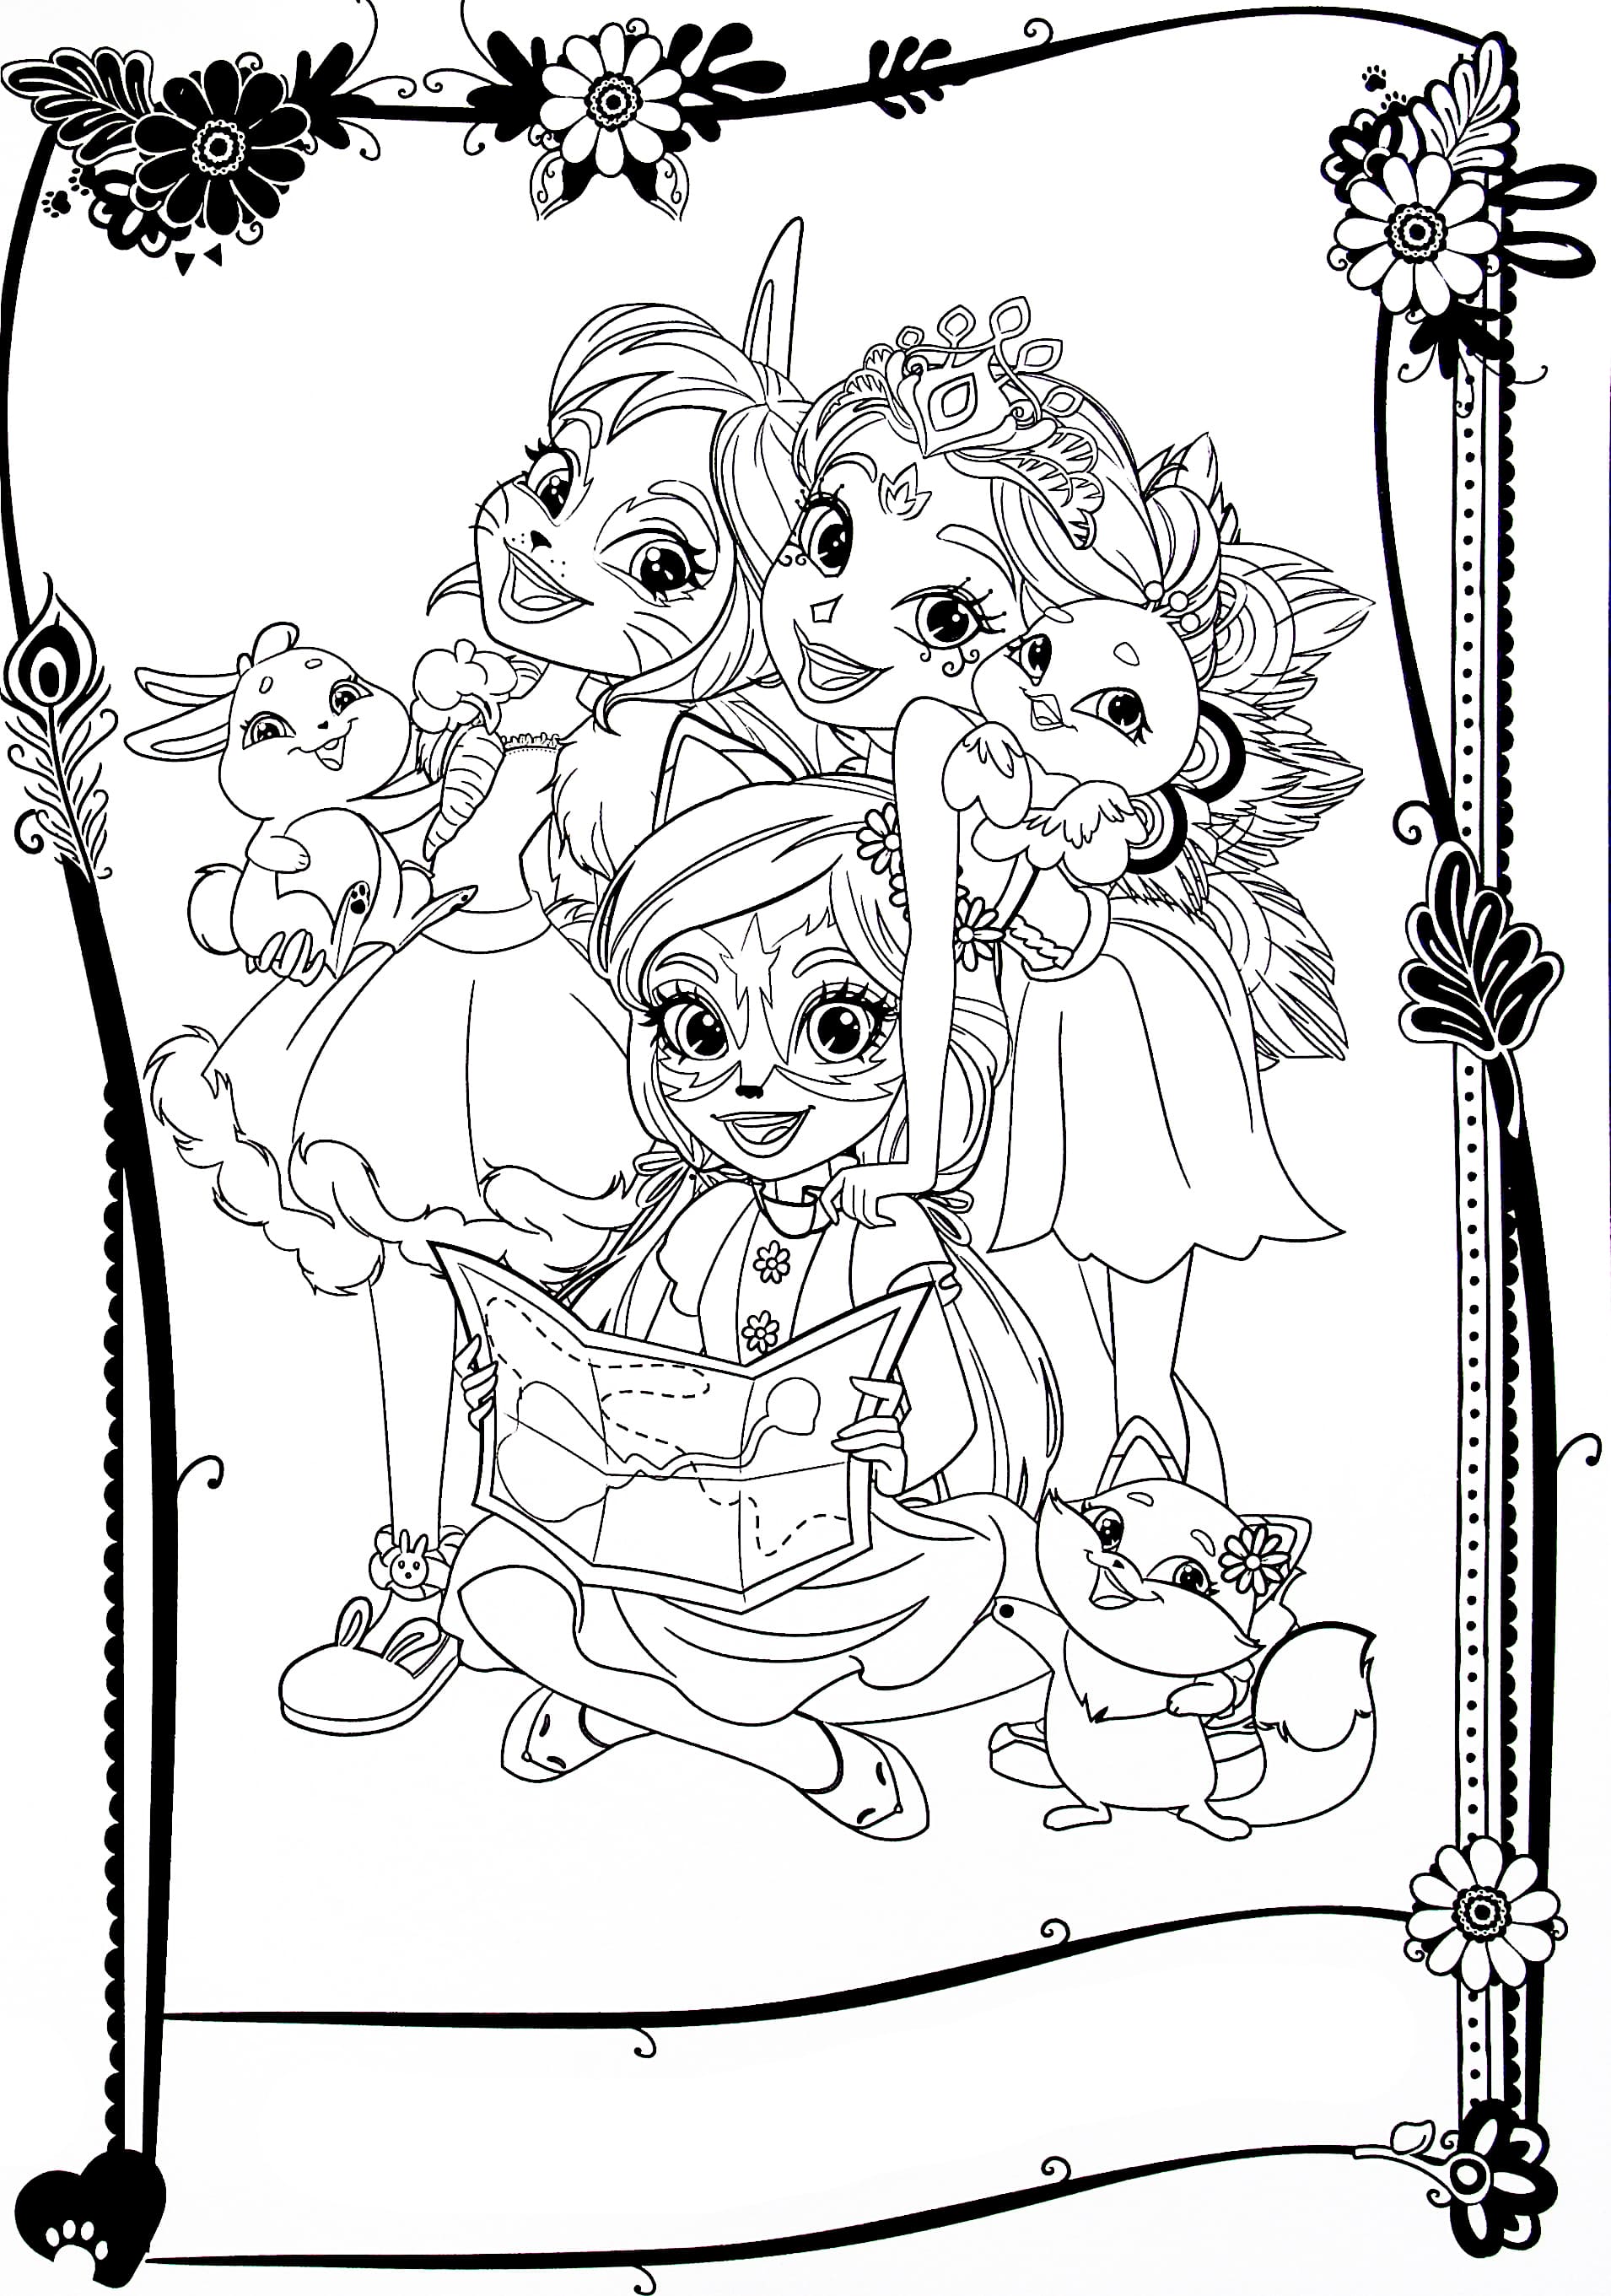 Enchantimals Coloring Pages | 50 Pictures Free Printable